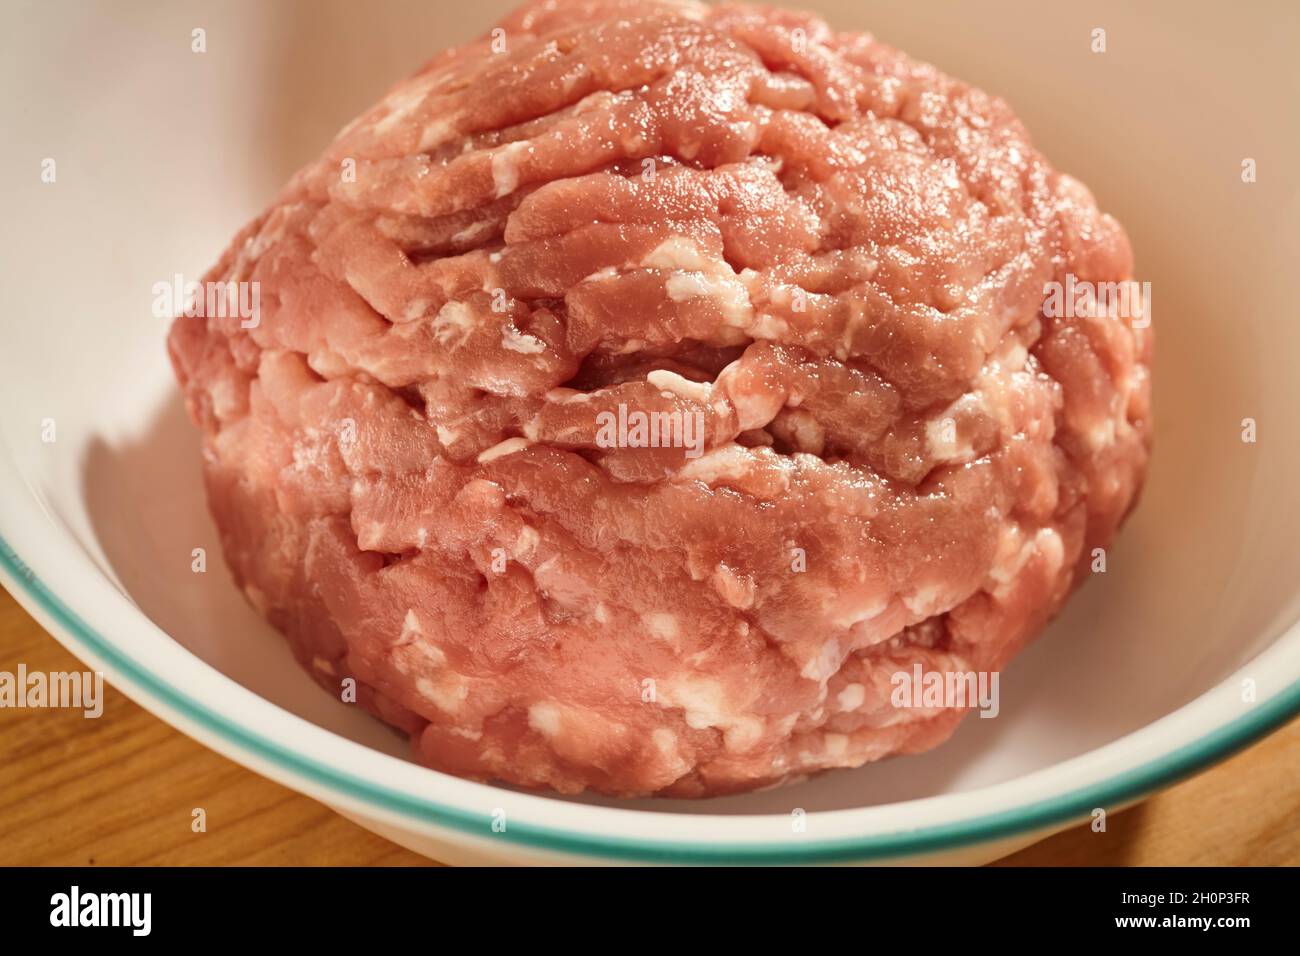 Fresh, raw ground pork, called mince in some places. Stock Photo